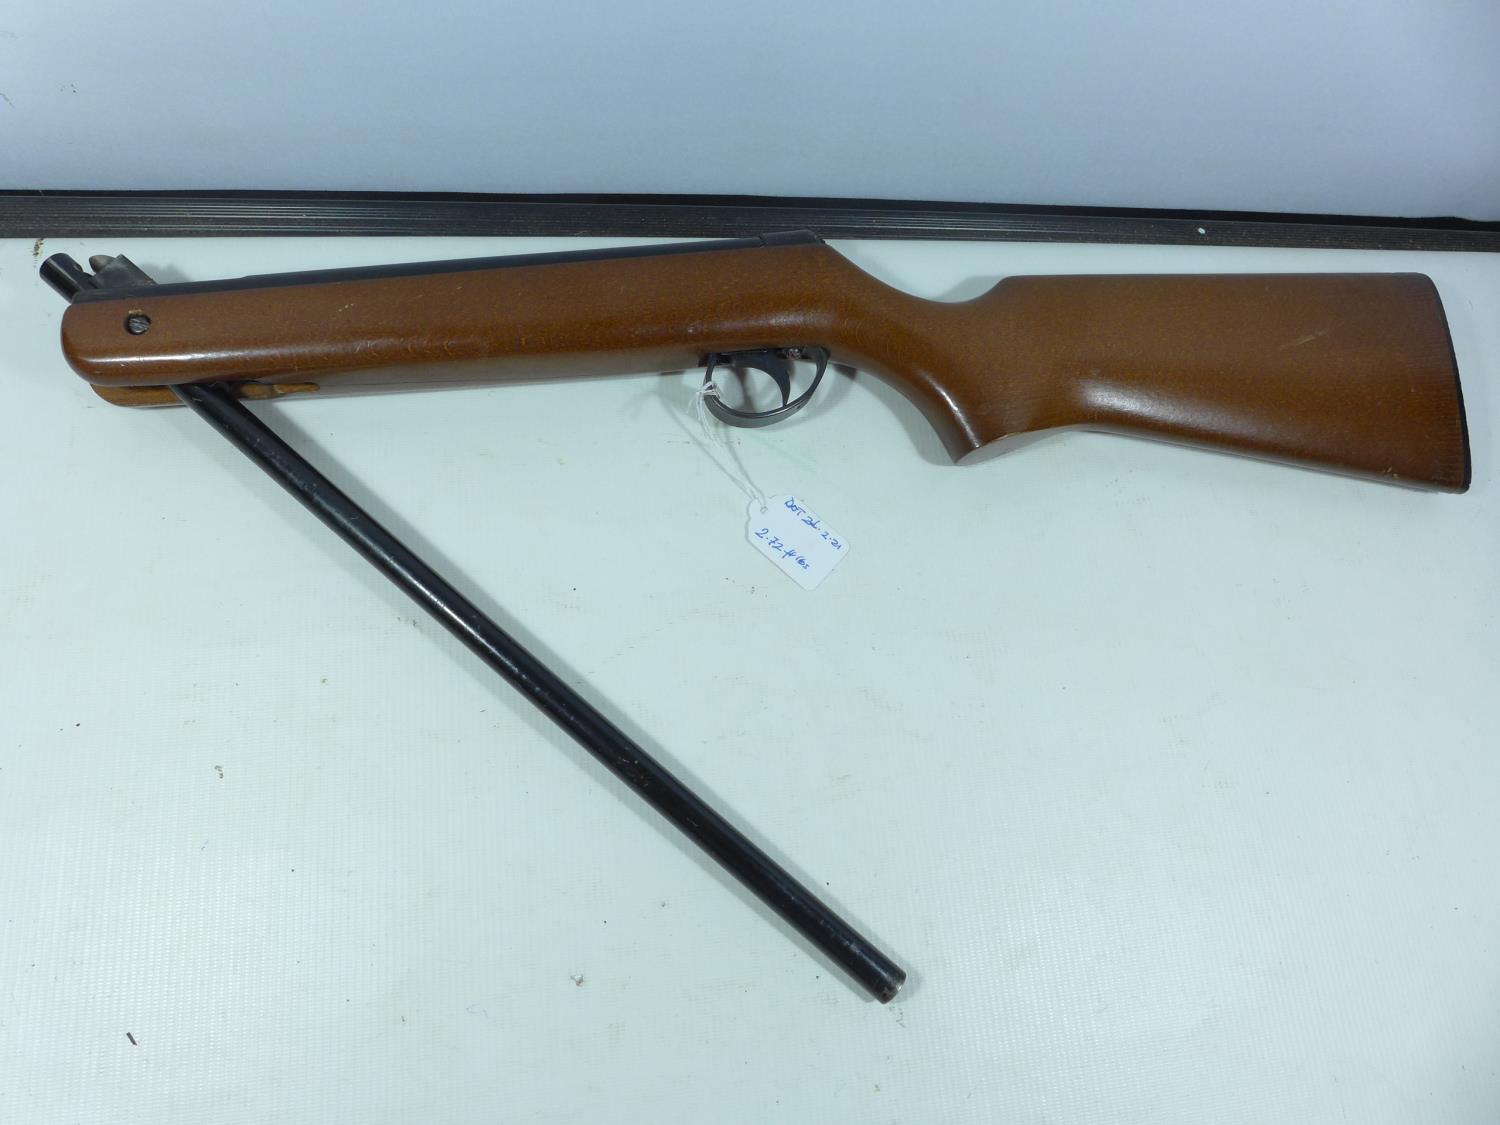 A B.S.A. METEOR .22 CALIBRE AIR RIFLE, 47CM BARREL, SERIAL NUMBER TH27453 WORKING WHEN CATALOGUED - Image 3 of 3